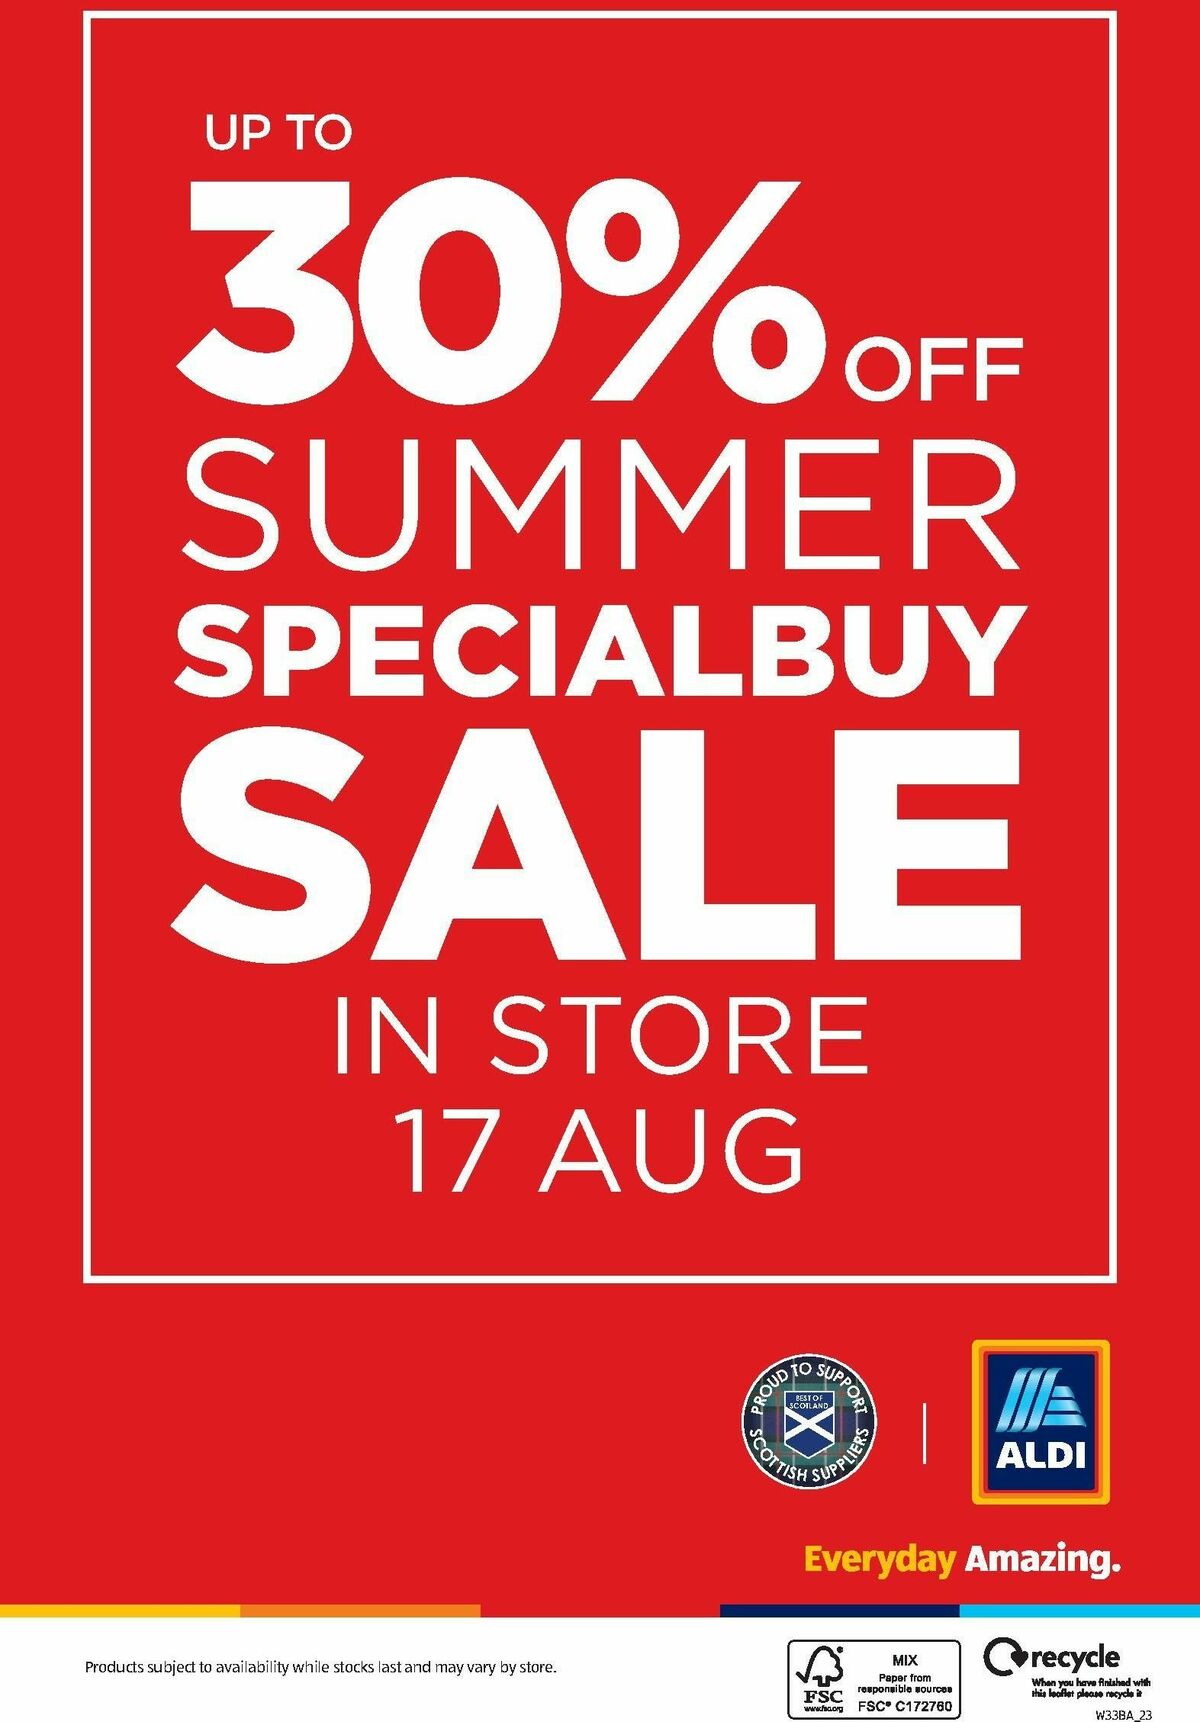 ALDI Scottish Offers from 14 August